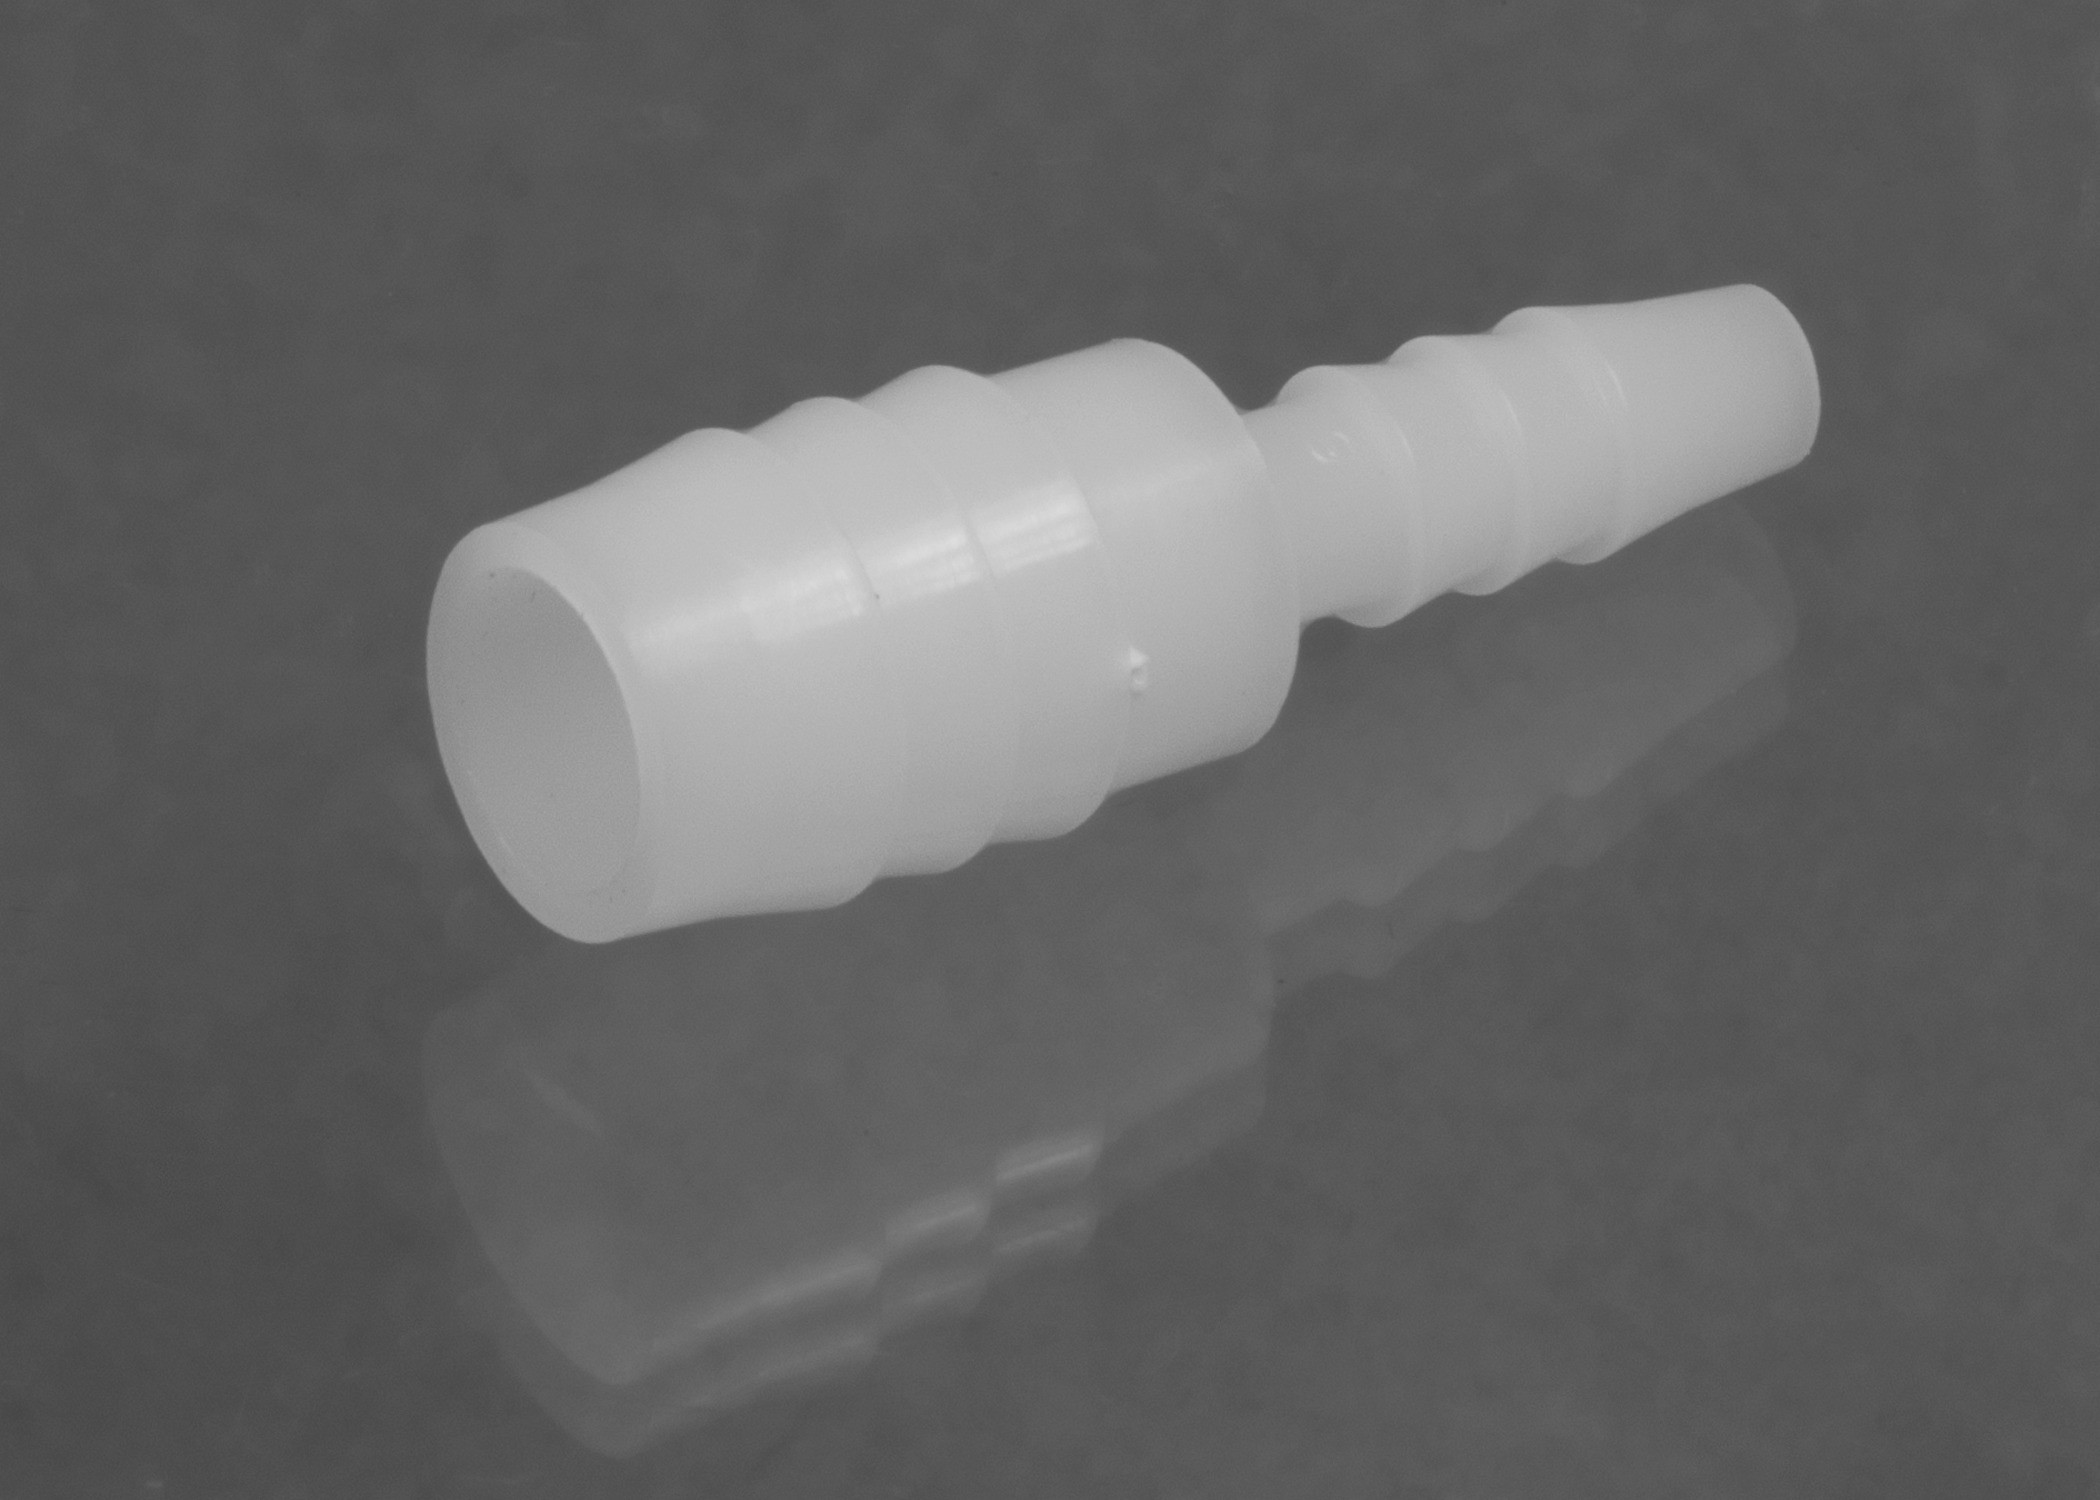 Bel-Art Stepped Tubing Connectors for ³⁄₁₆ in Tubing; Polypropylene Pack of 12 to ½ in H19559-0000 